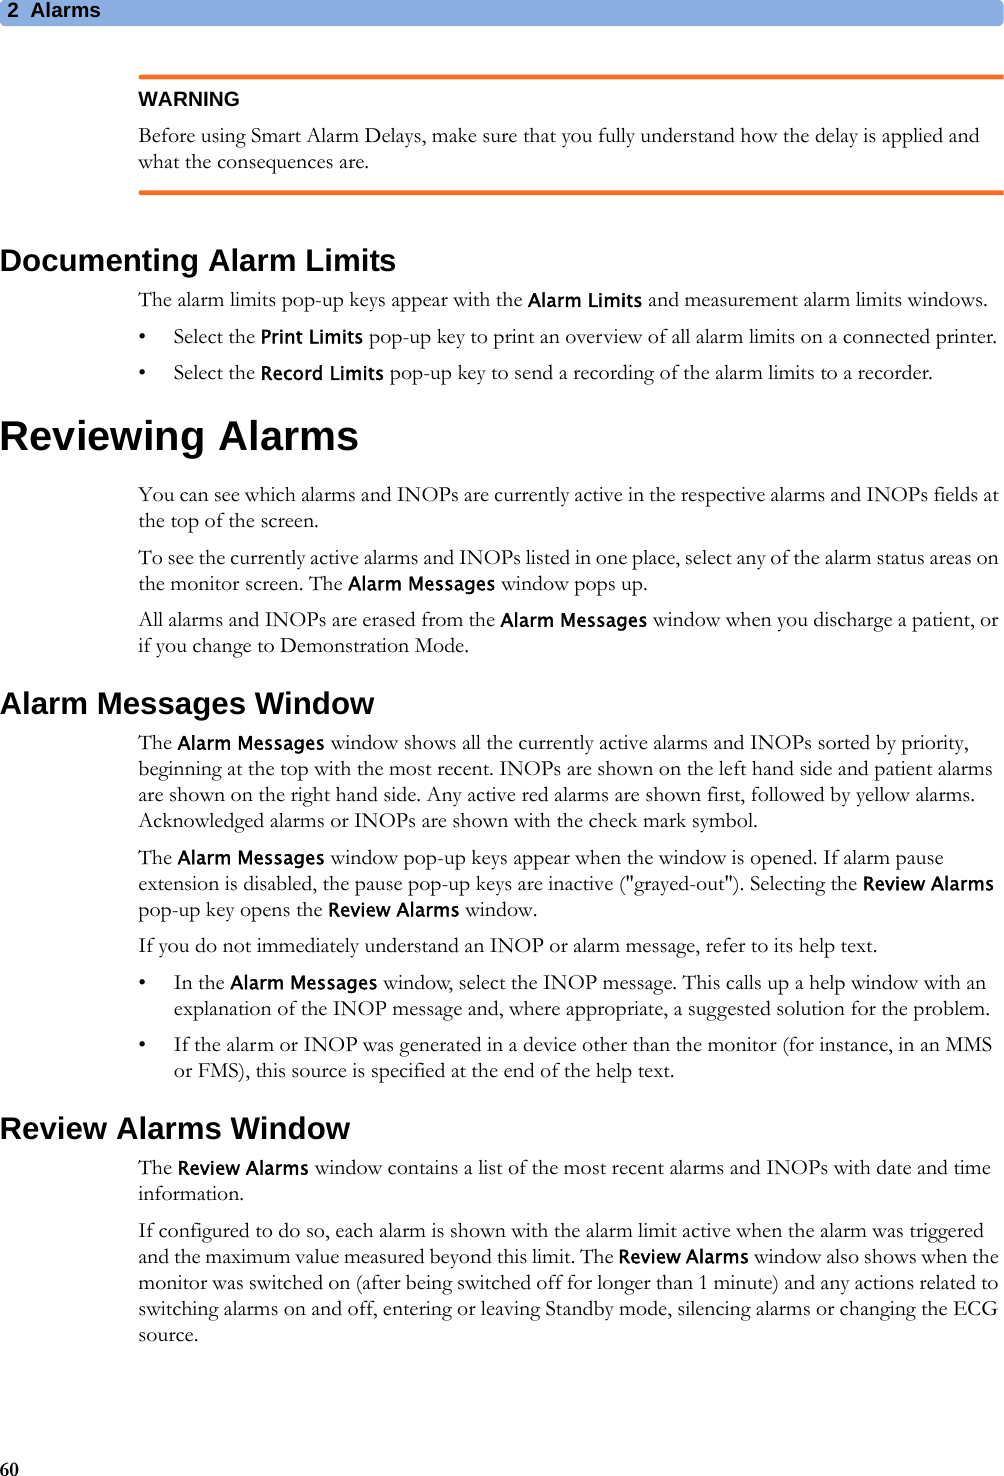 2 Alarms60WARNINGBefore using Smart Alarm Delays, make sure that you fully understand how the delay is applied and what the consequences are.Documenting Alarm LimitsThe alarm limits pop-up keys appear with the Alarm Limits and measurement alarm limits windows.• Select the Print Limits pop-up key to print an overview of all alarm limits on a connected printer.• Select the Record Limits pop-up key to send a recording of the alarm limits to a recorder.Reviewing AlarmsYou can see which alarms and INOPs are currently active in the respective alarms and INOPs fields at the top of the screen.To see the currently active alarms and INOPs listed in one place, select any of the alarm status areas on the monitor screen. The Alarm Messages window pops up.All alarms and INOPs are erased from the Alarm Messages window when you discharge a patient, or if you change to Demonstration Mode.Alarm Messages WindowThe Alarm Messages window shows all the currently active alarms and INOPs sorted by priority, beginning at the top with the most recent. INOPs are shown on the left hand side and patient alarms are shown on the right hand side. Any active red alarms are shown first, followed by yellow alarms. Acknowledged alarms or INOPs are shown with the check mark symbol.The Alarm Messages window pop-up keys appear when the window is opened. If alarm pause extension is disabled, the pause pop-up keys are inactive (&quot;grayed-out&quot;). Selecting the Review Alarms pop-up key opens the Review Alarms window.If you do not immediately understand an INOP or alarm message, refer to its help text.•In the Alarm Messages window, select the INOP message. This calls up a help window with an explanation of the INOP message and, where appropriate, a suggested solution for the problem.• If the alarm or INOP was generated in a device other than the monitor (for instance, in an MMS or FMS), this source is specified at the end of the help text.Review Alarms WindowThe Review Alarms window contains a list of the most recent alarms and INOPs with date and time information.If configured to do so, each alarm is shown with the alarm limit active when the alarm was triggered and the maximum value measured beyond this limit. The Review Alarms window also shows when the monitor was switched on (after being switched off for longer than 1 minute) and any actions related to switching alarms on and off, entering or leaving Standby mode, silencing alarms or changing the ECG source.